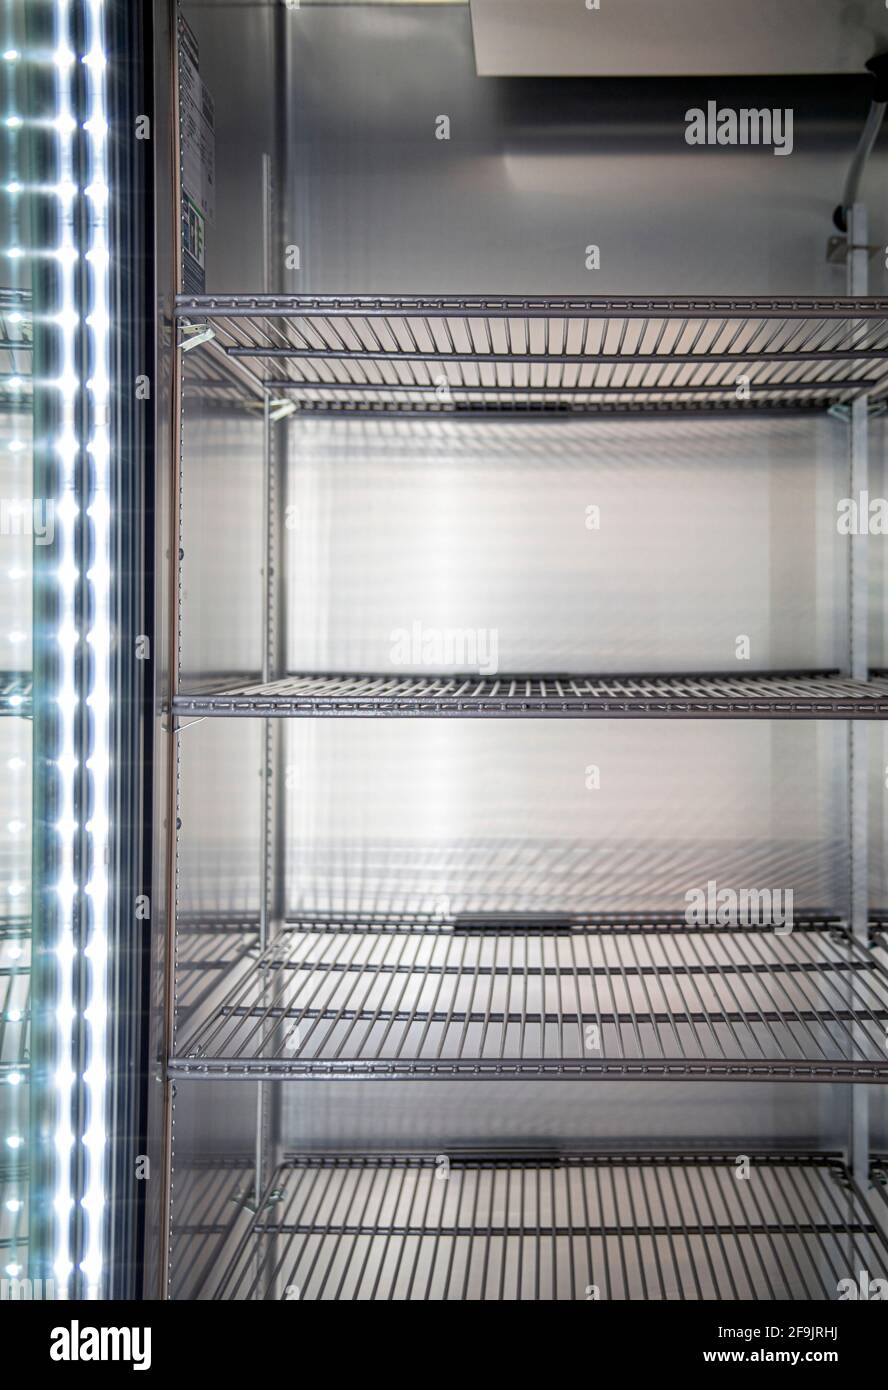 Clean and empty commercial fridge shelves Stock Photo